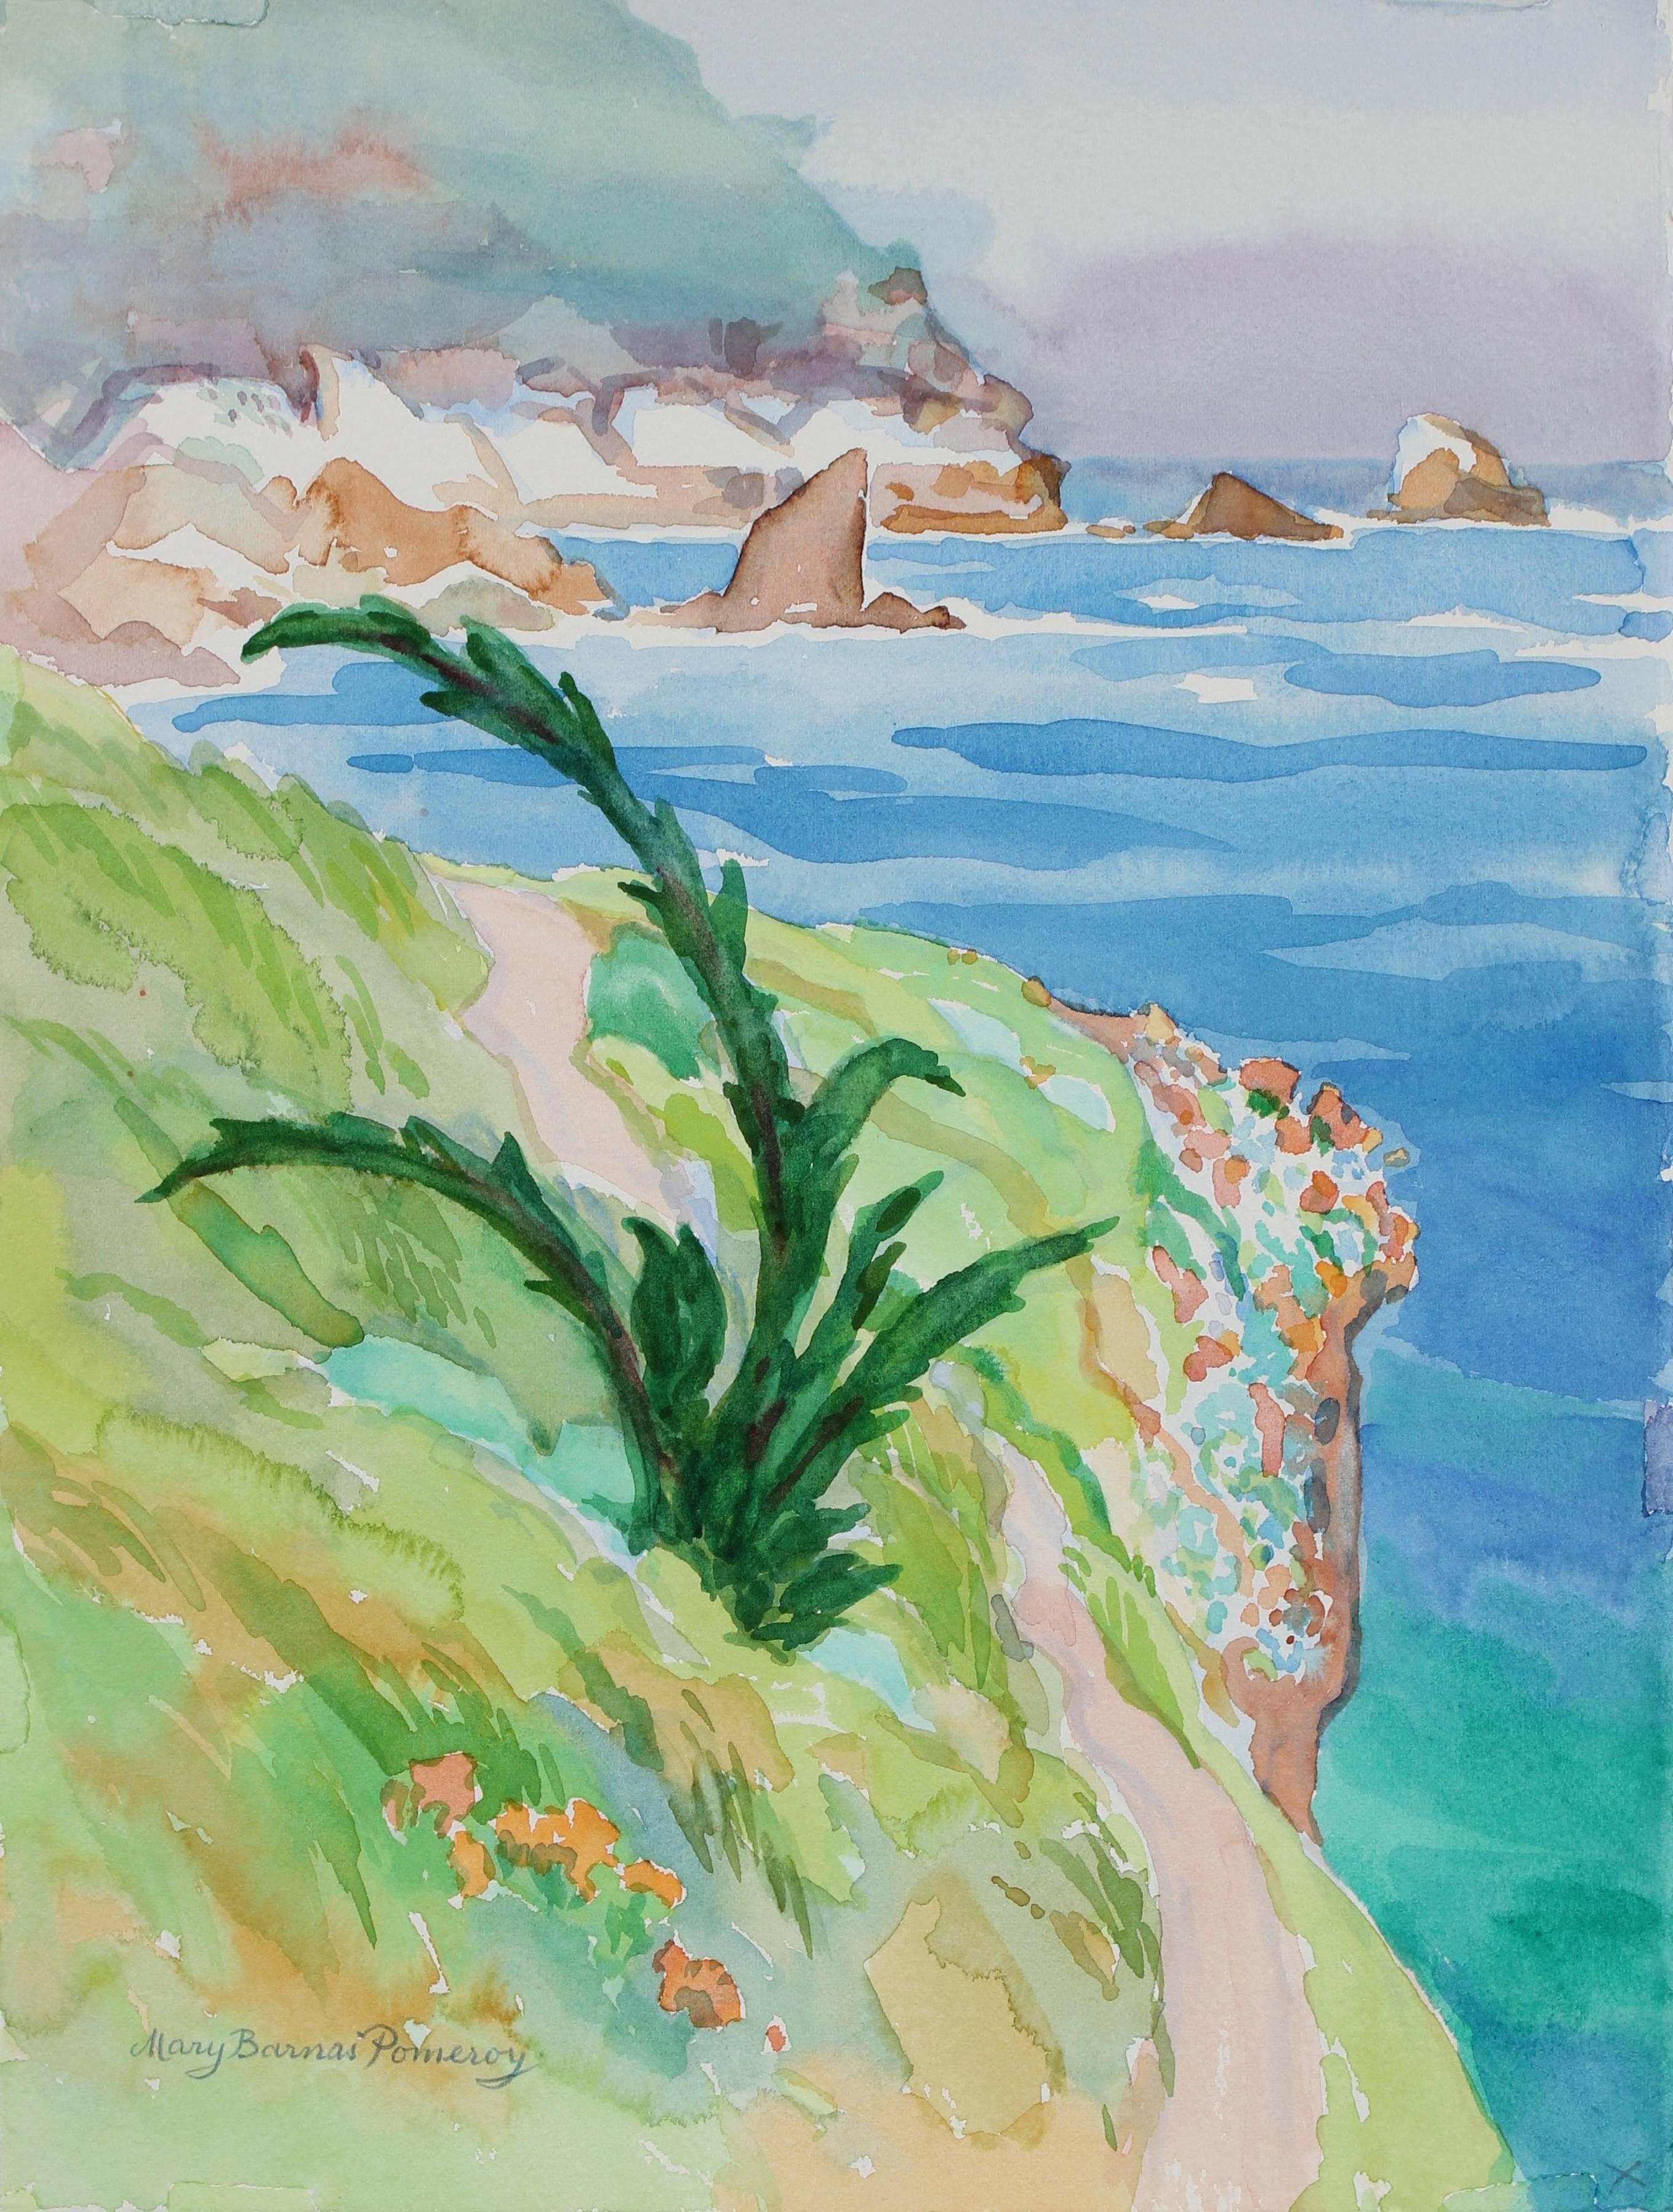 Mary Pomeroy Landscape Art - "Young Monterey Cypress, Point Lobos" Seaside Botanical Watercolor, 1999